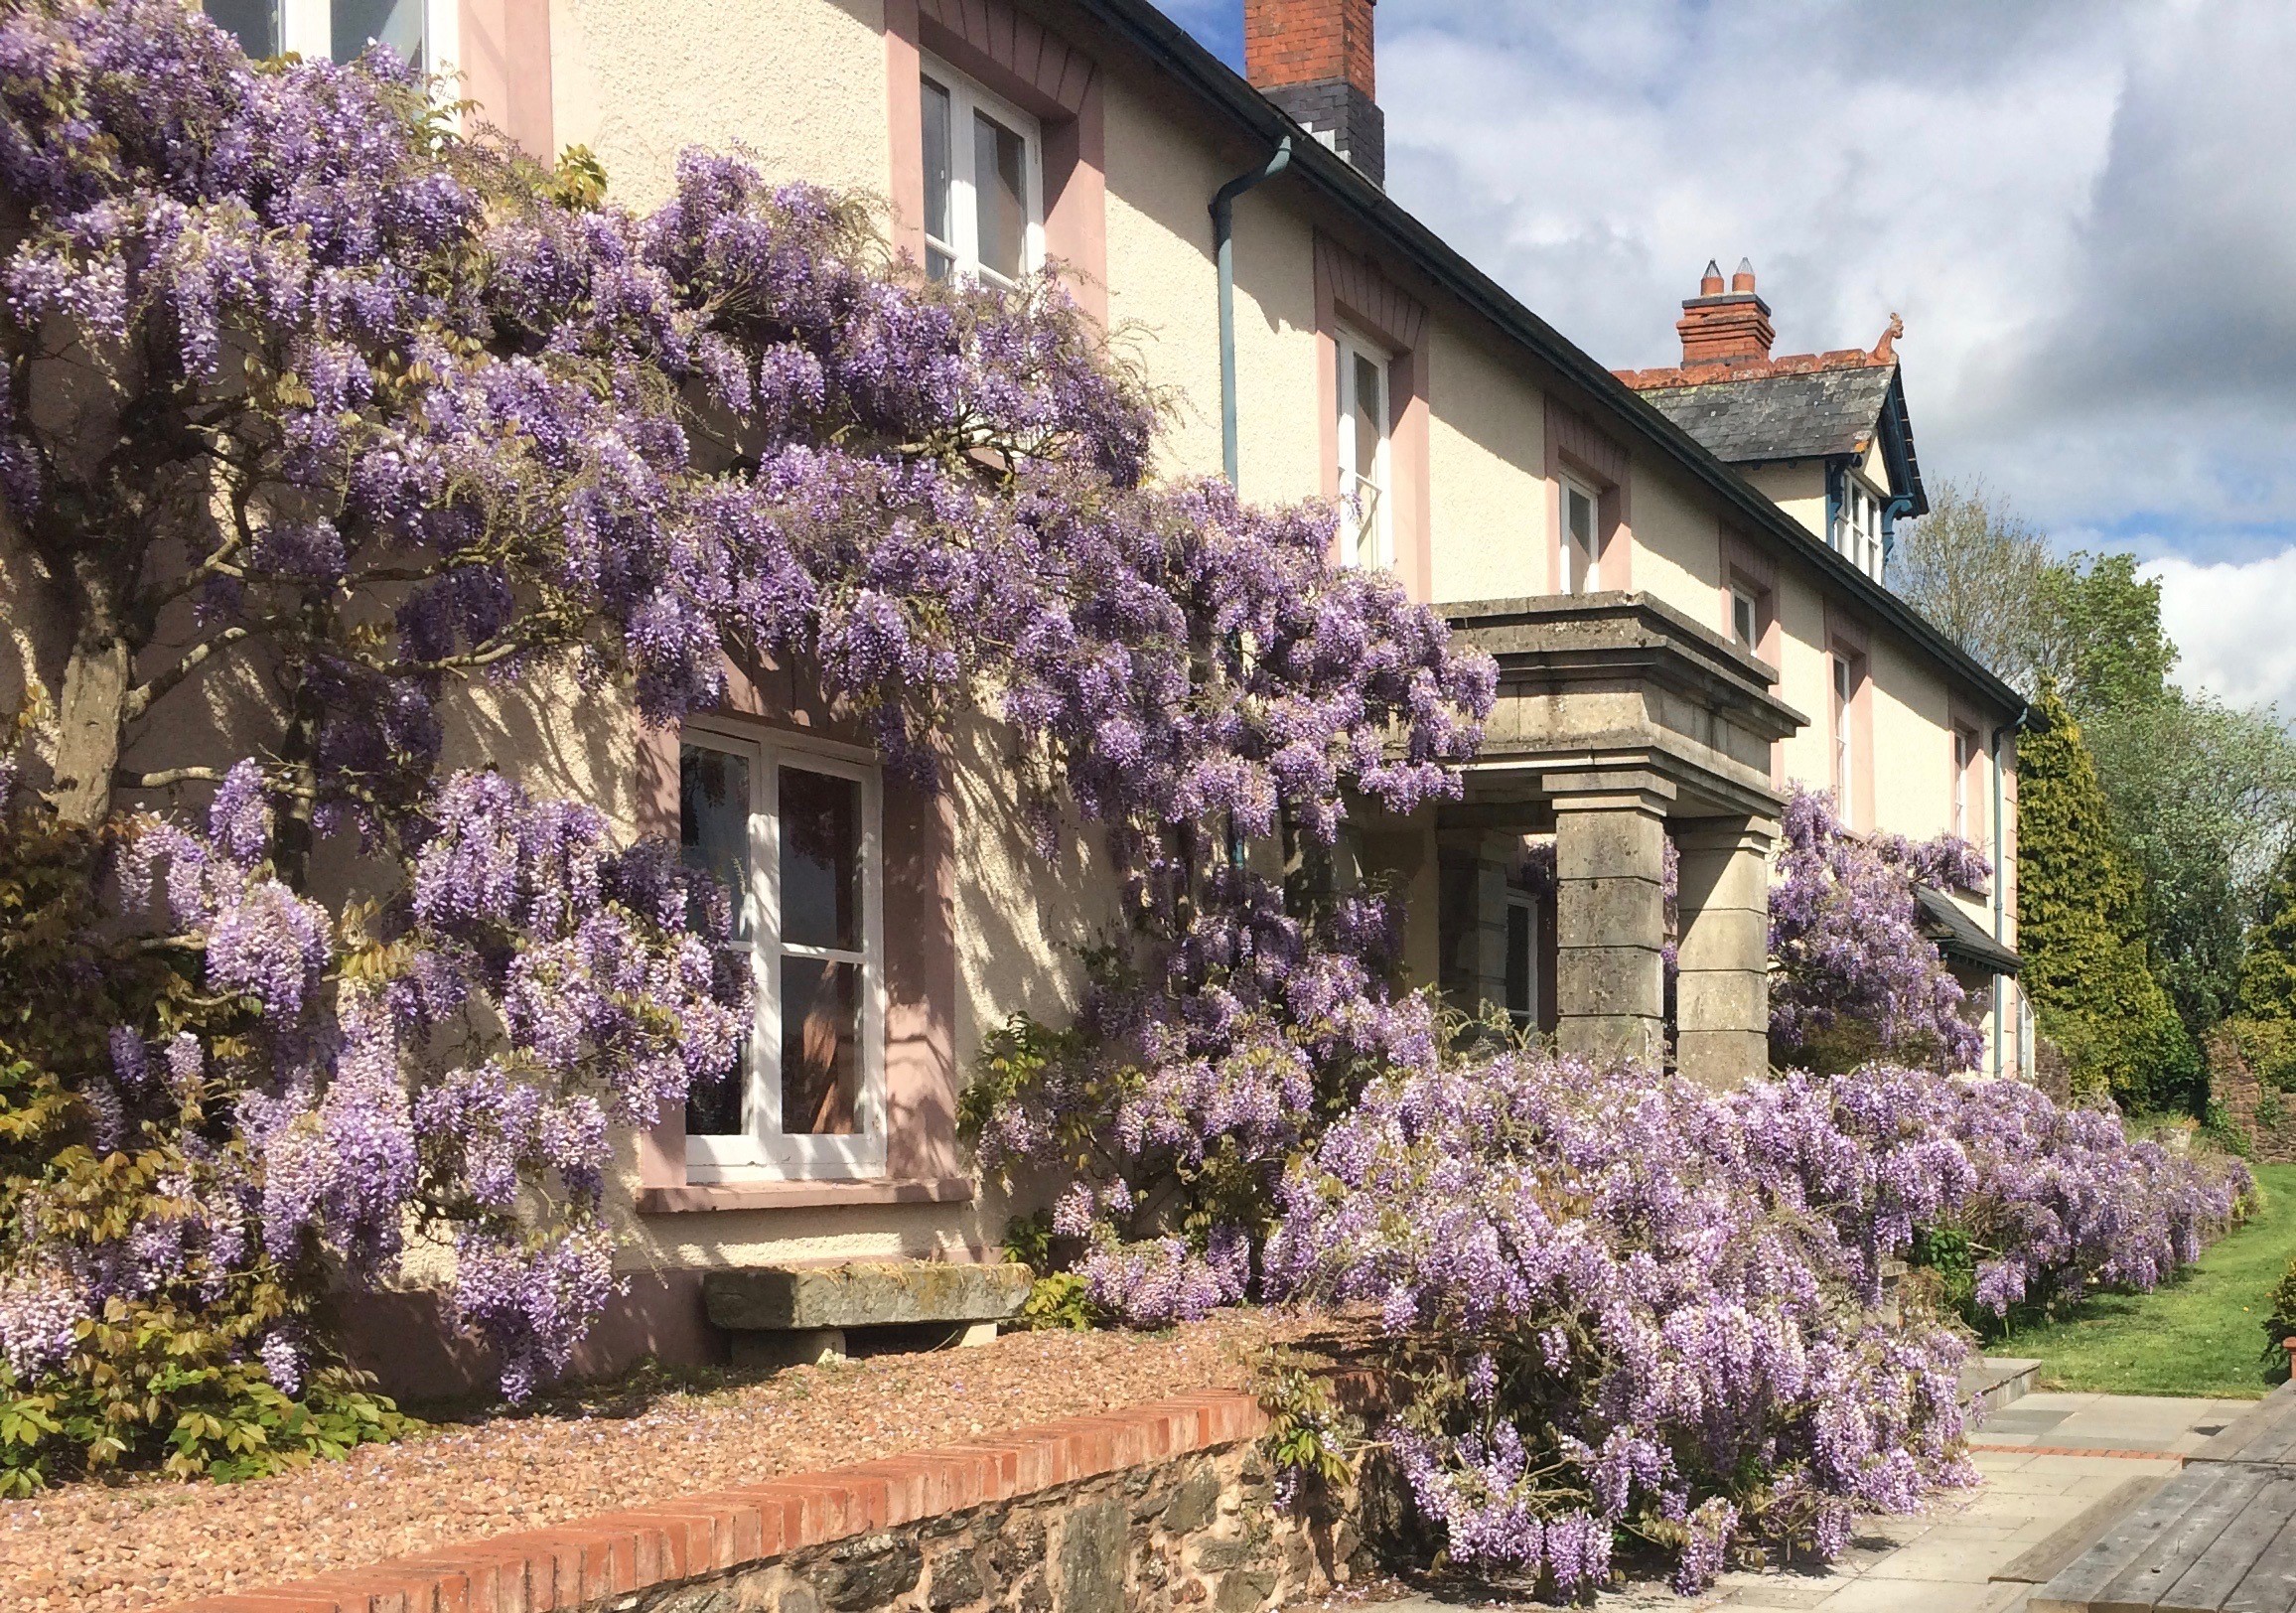 Hurstone House - covered in wisteria in the summer